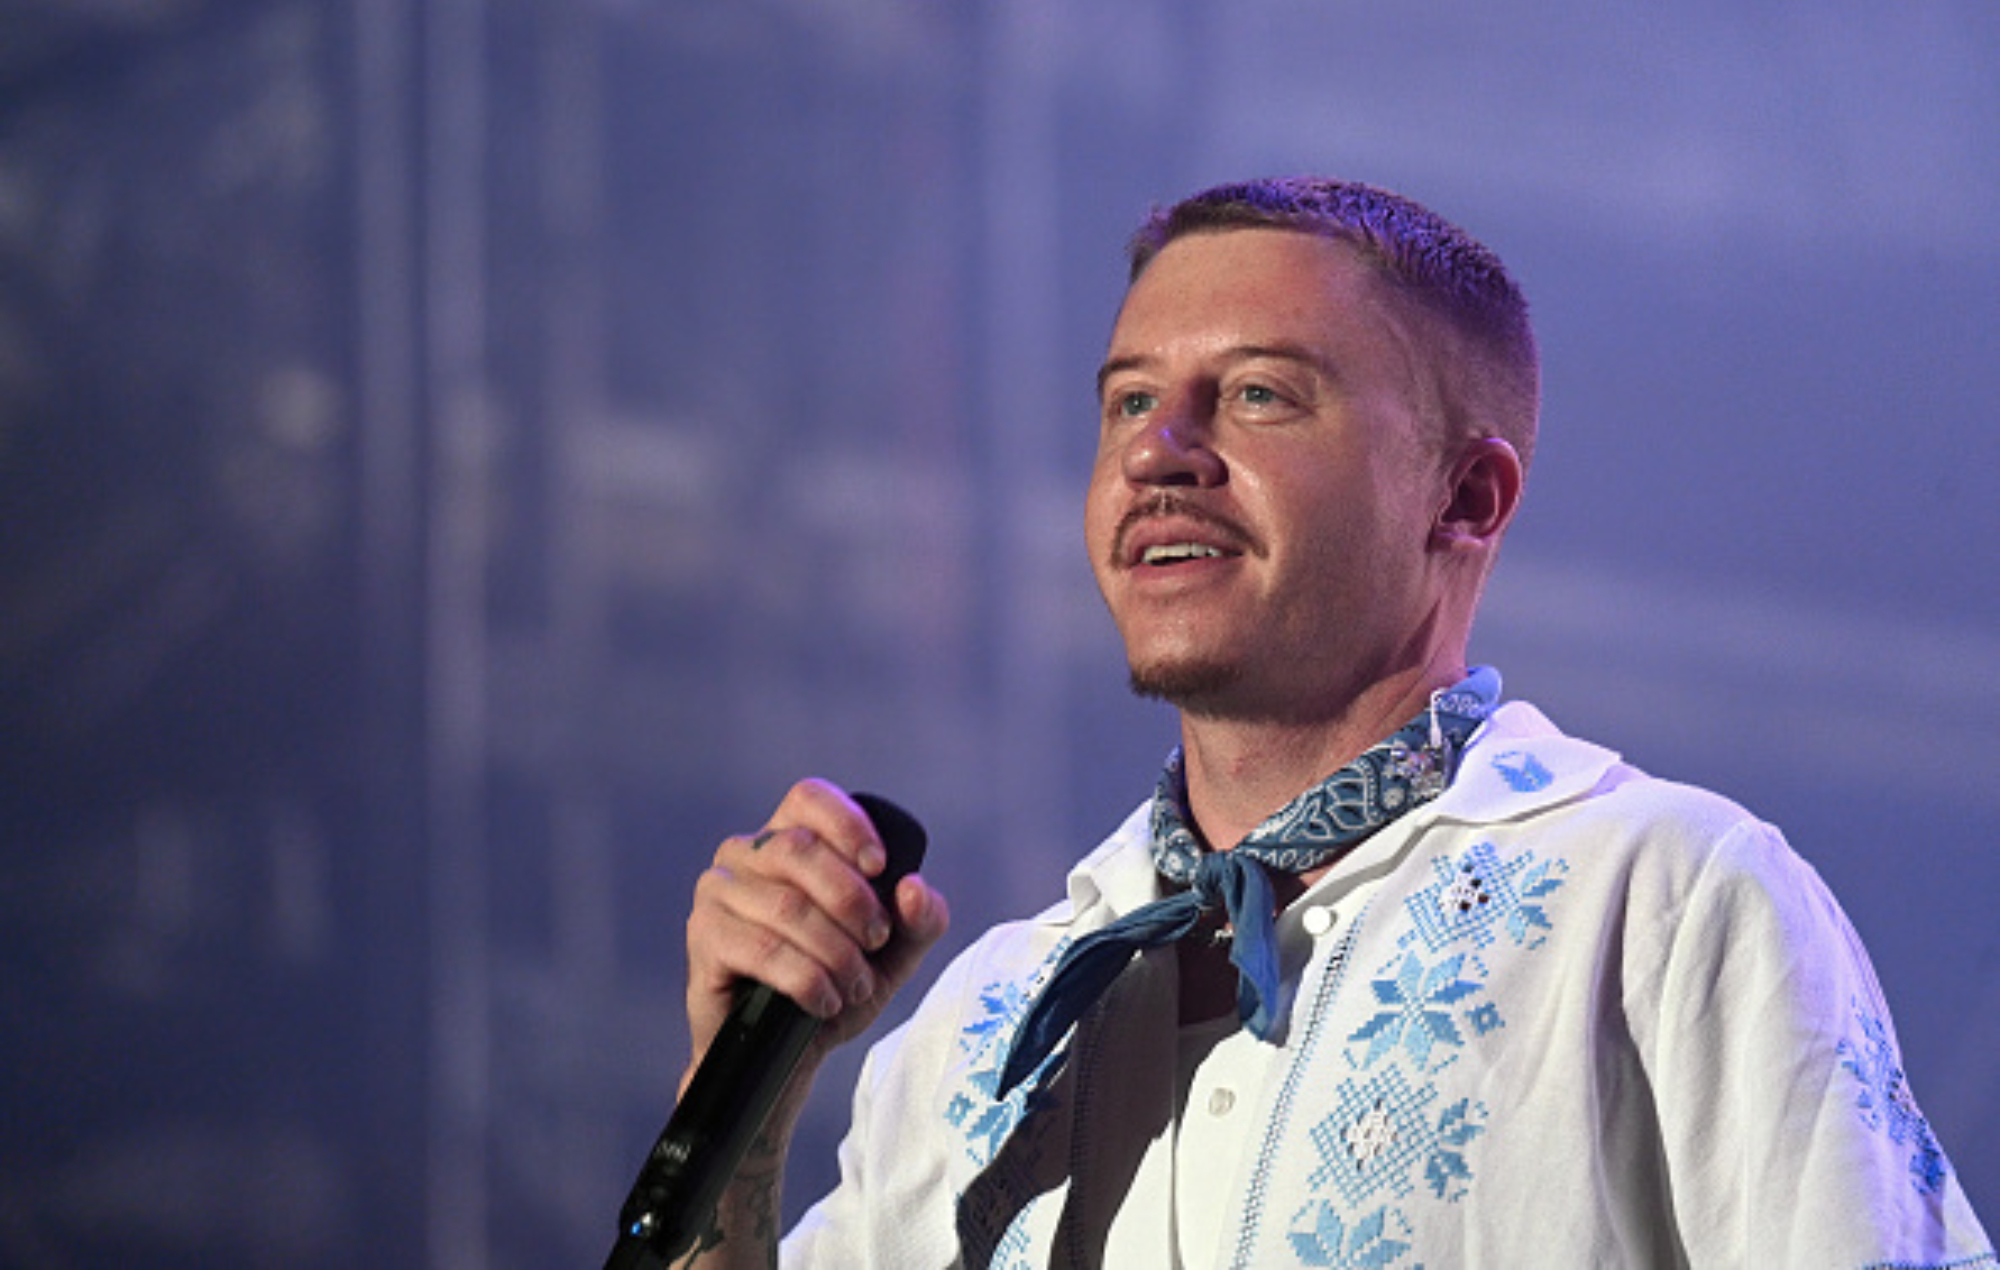 Macklemore delivers impromptu speech at pro-Palestine rally: “This is a genocide”